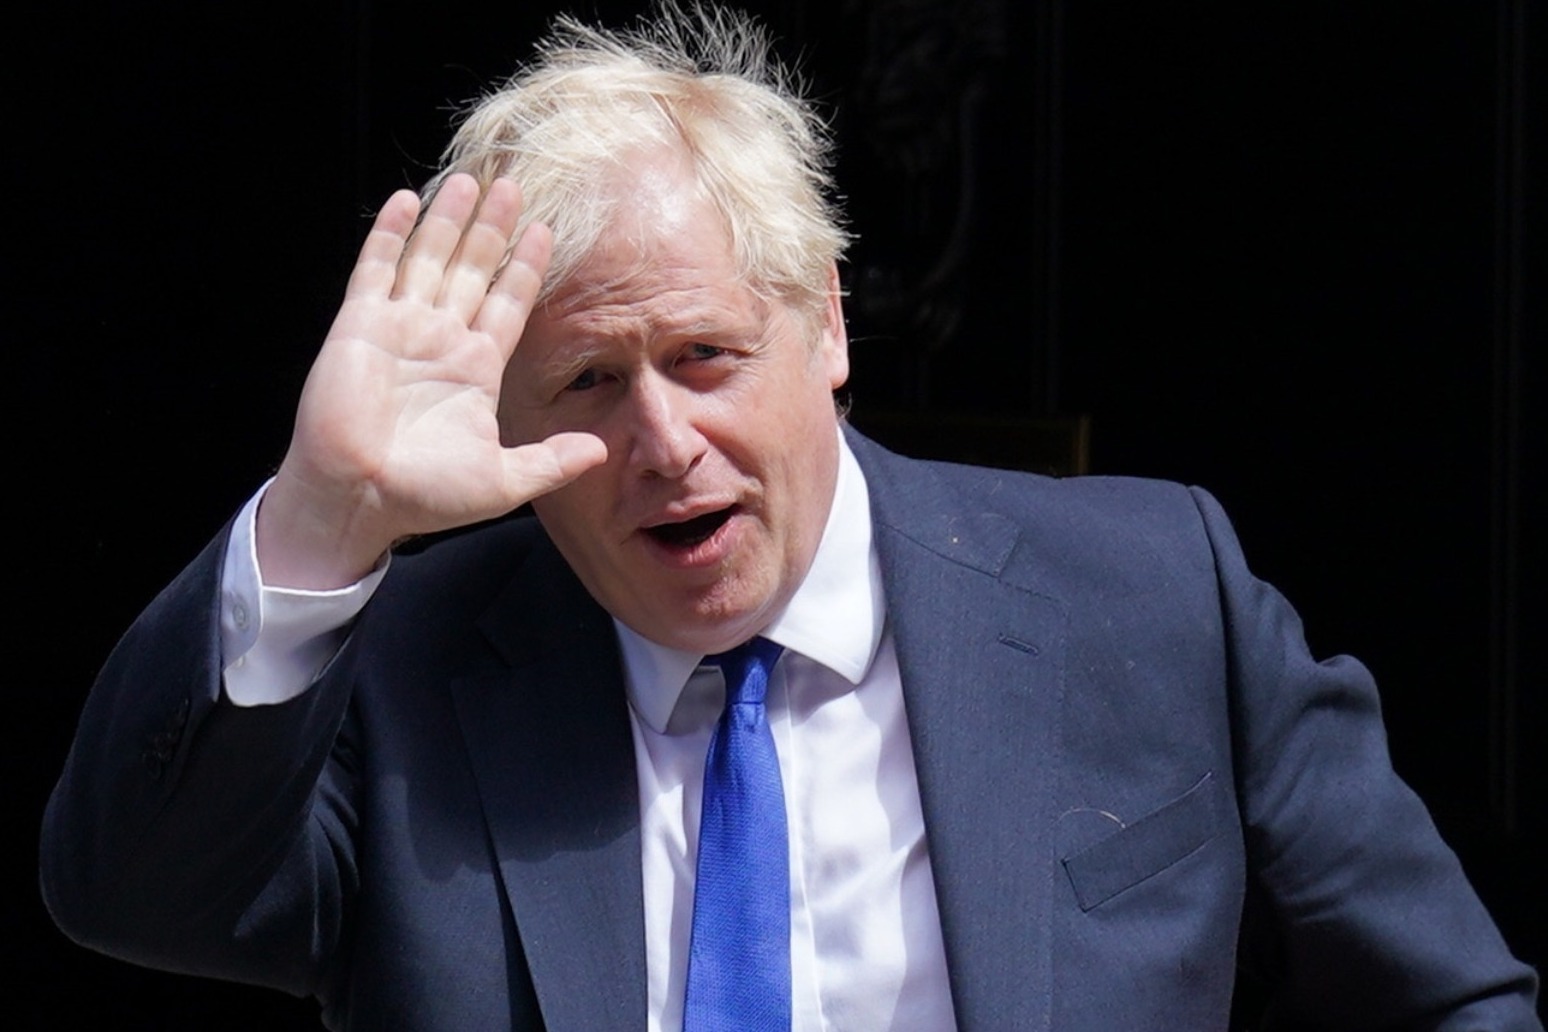 Boris Johnson remains defiant and is vowing to carry on, despite more resignations 